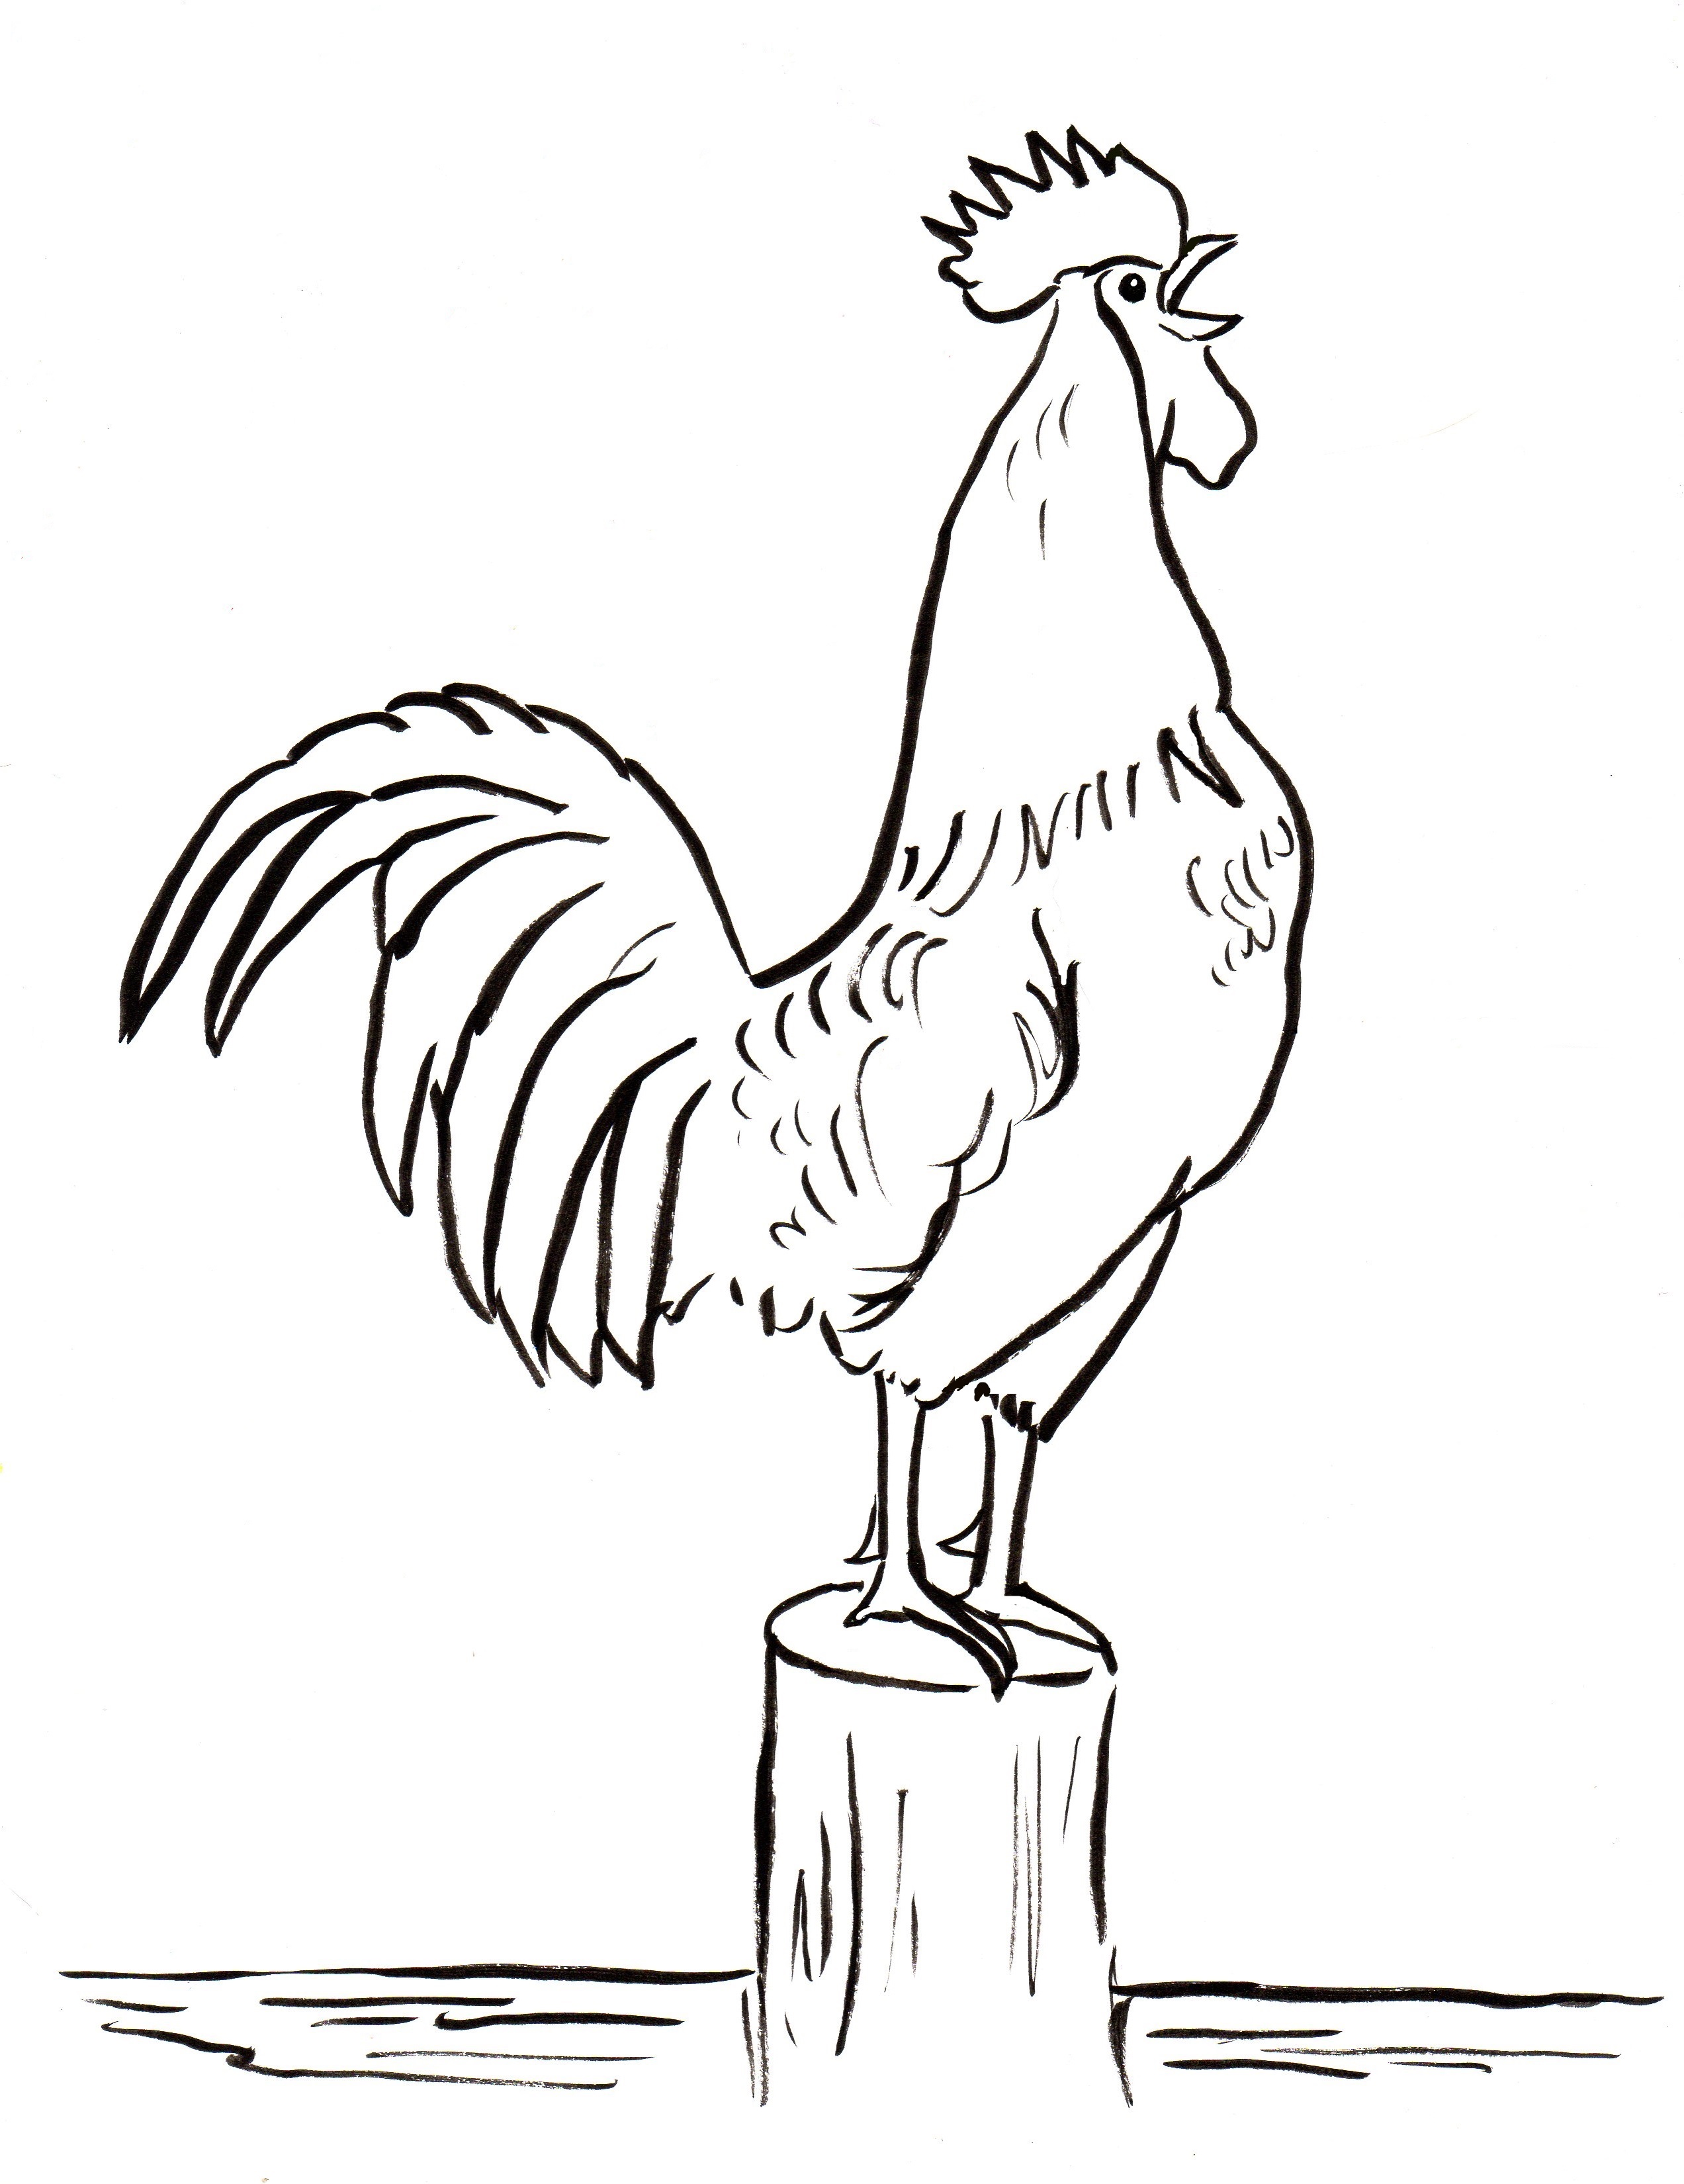 Rooster Coloring Page - Art Starts